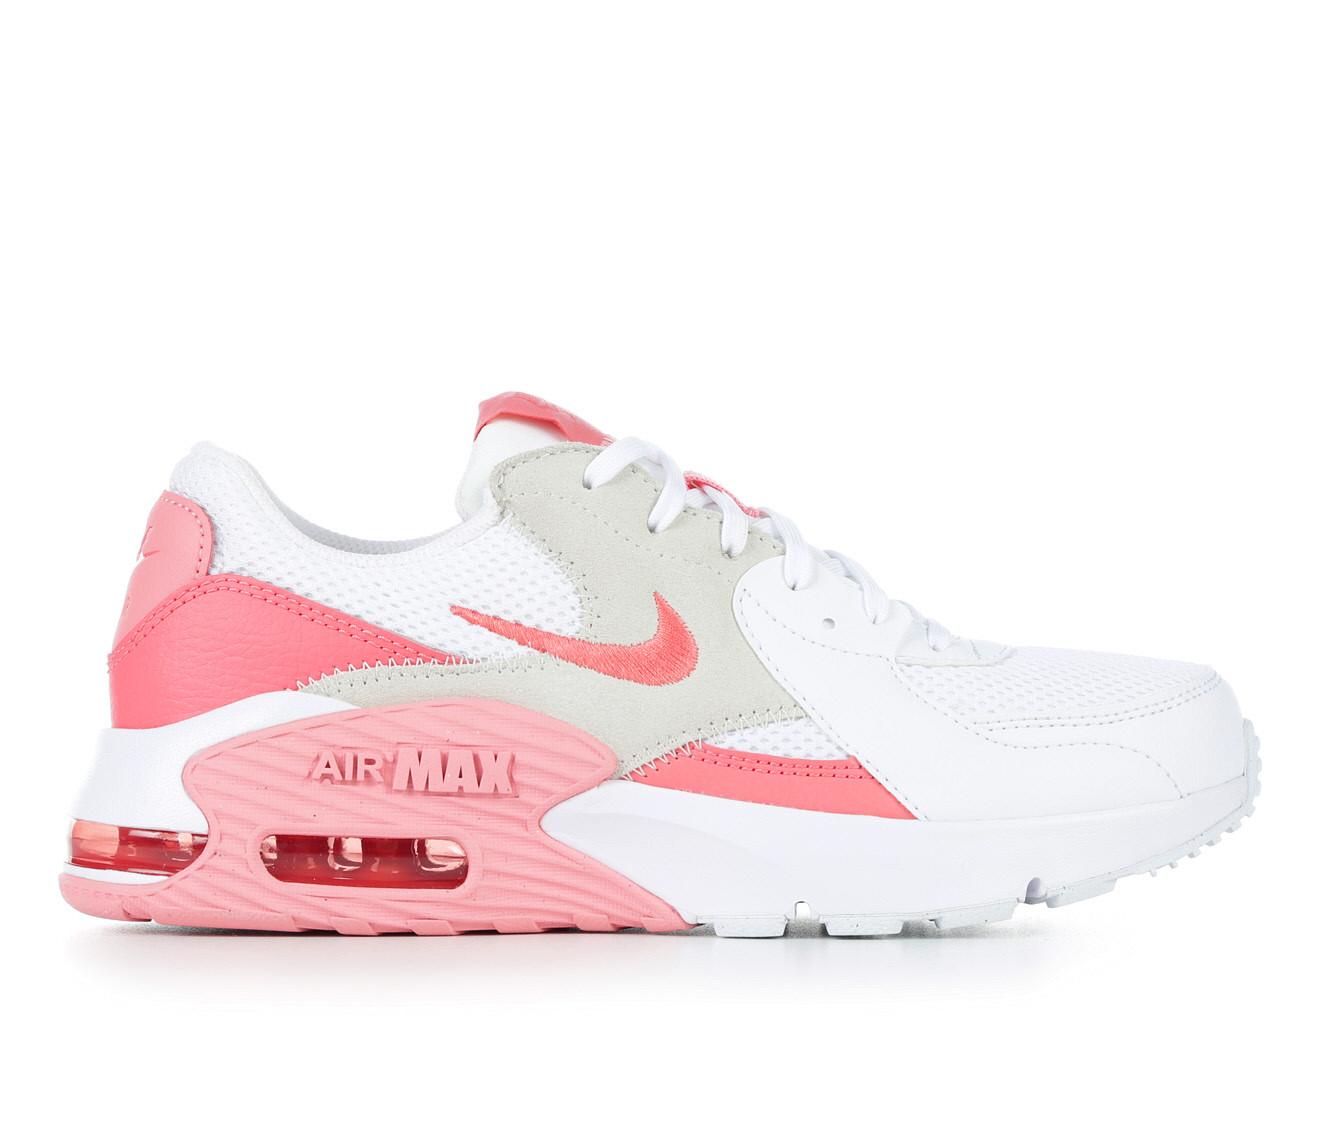 Shoes, Air Max, Accessories | Shoe